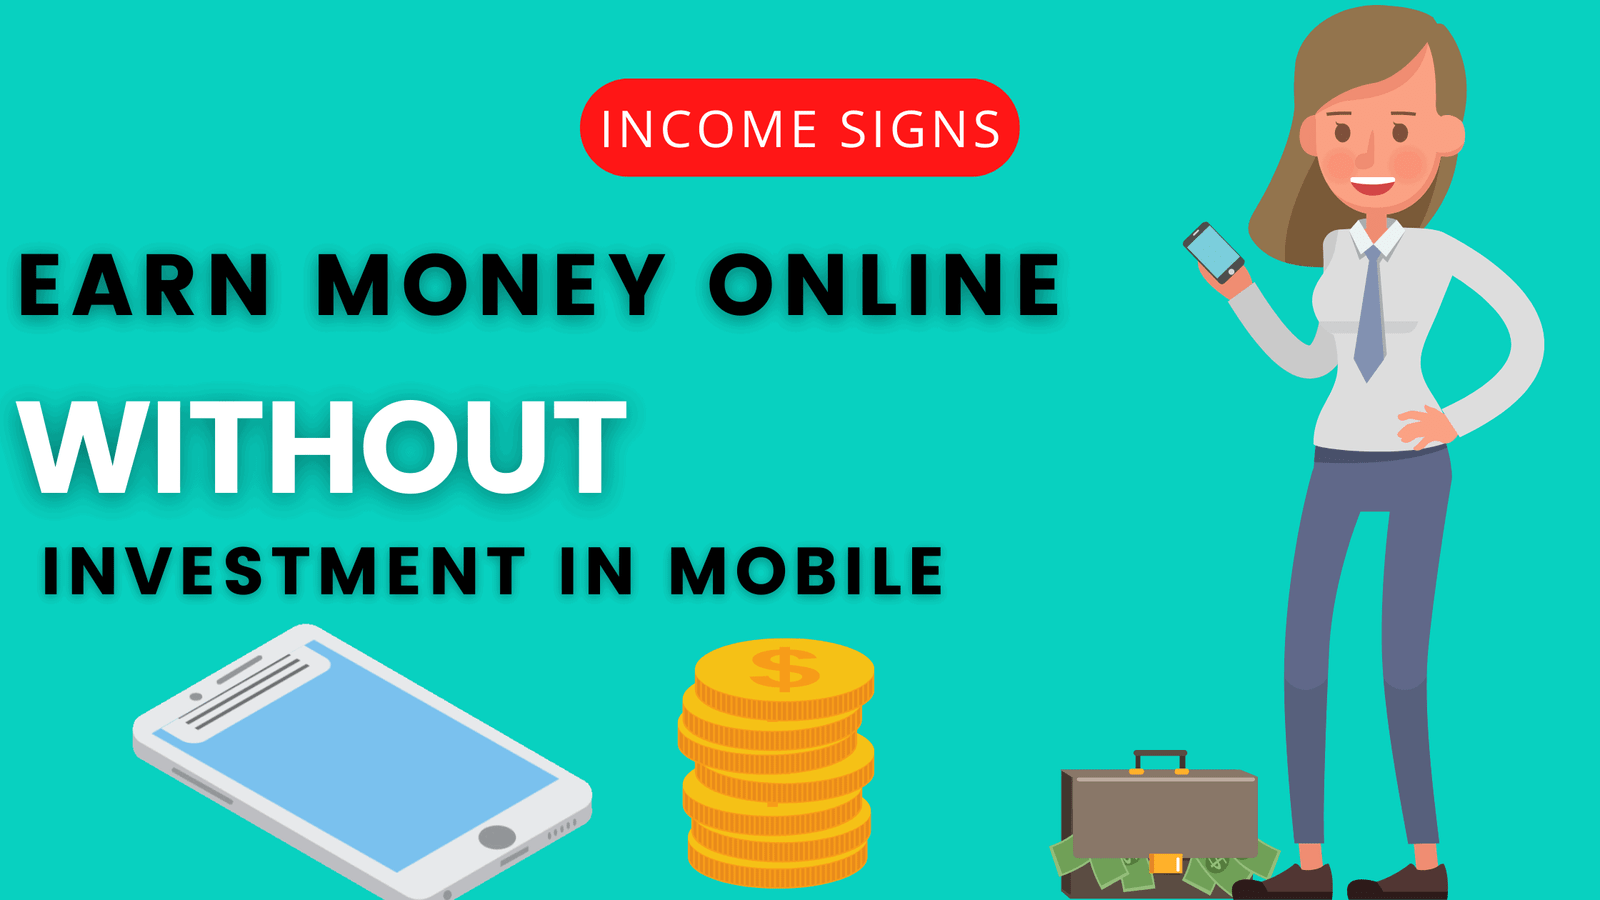 Earn Money Online Without Investment in Mobile